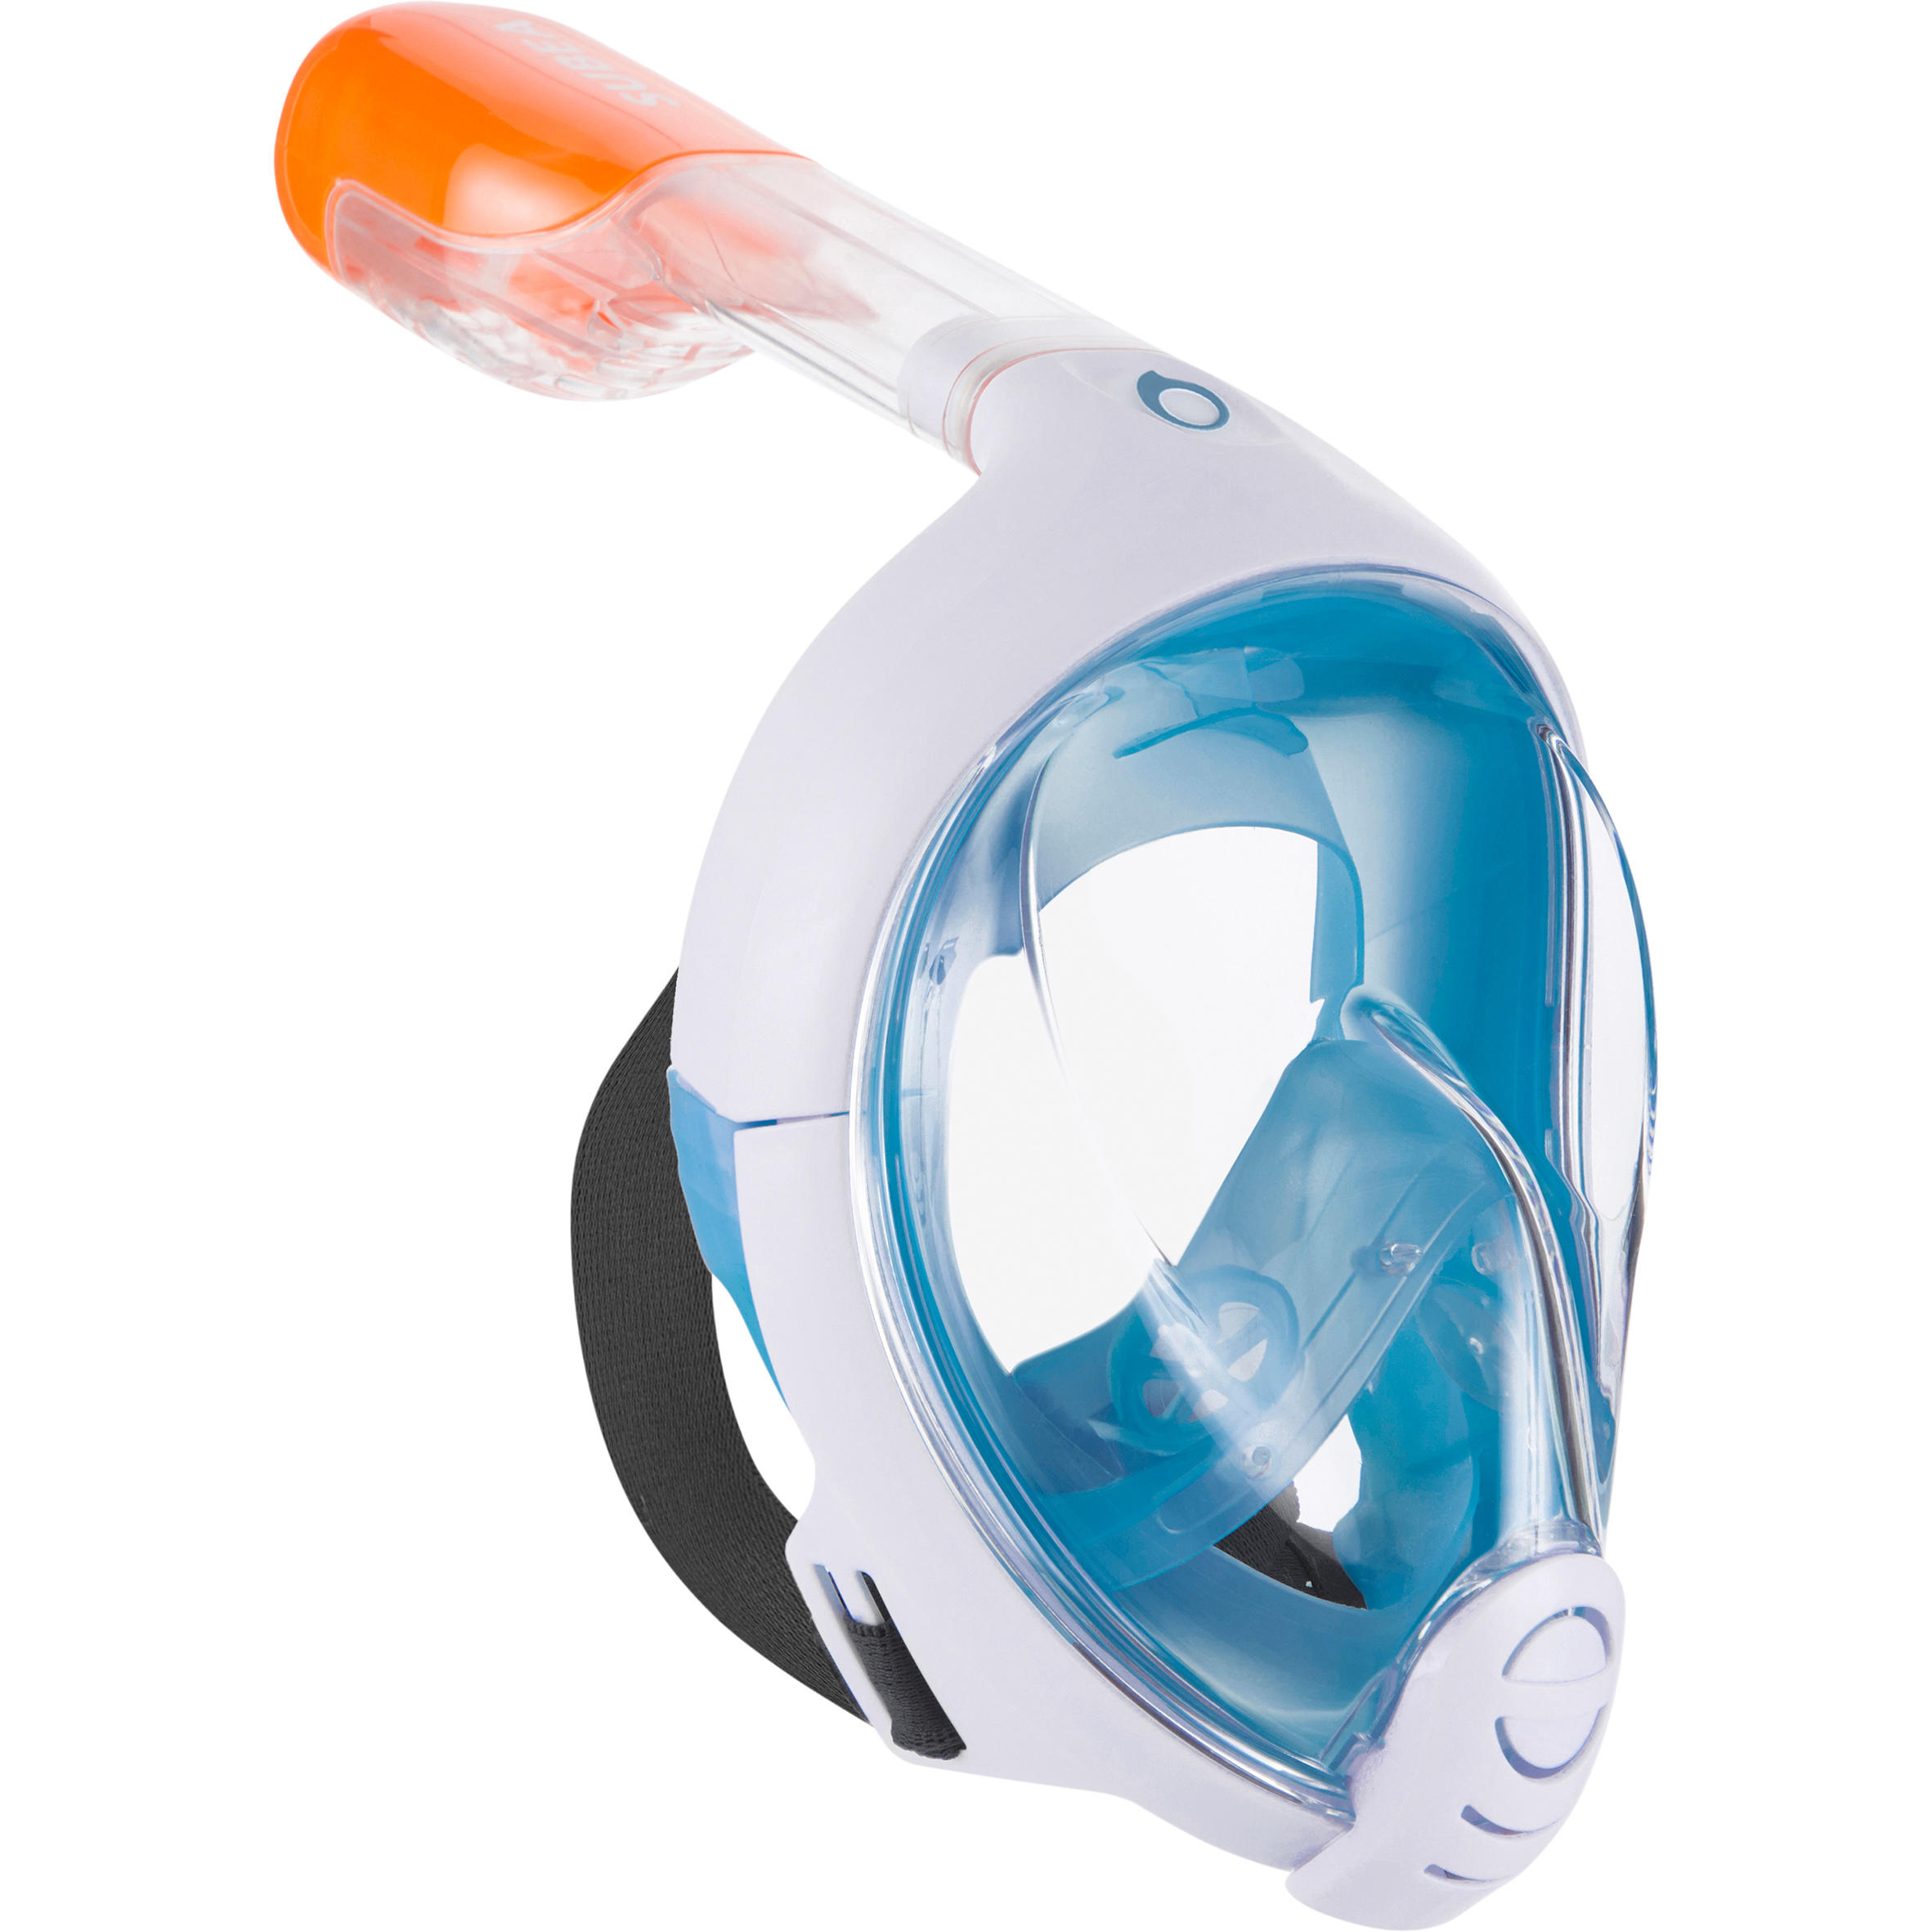 SUBEA Easybreath Surface Snorkelling Mask - Navy Blue